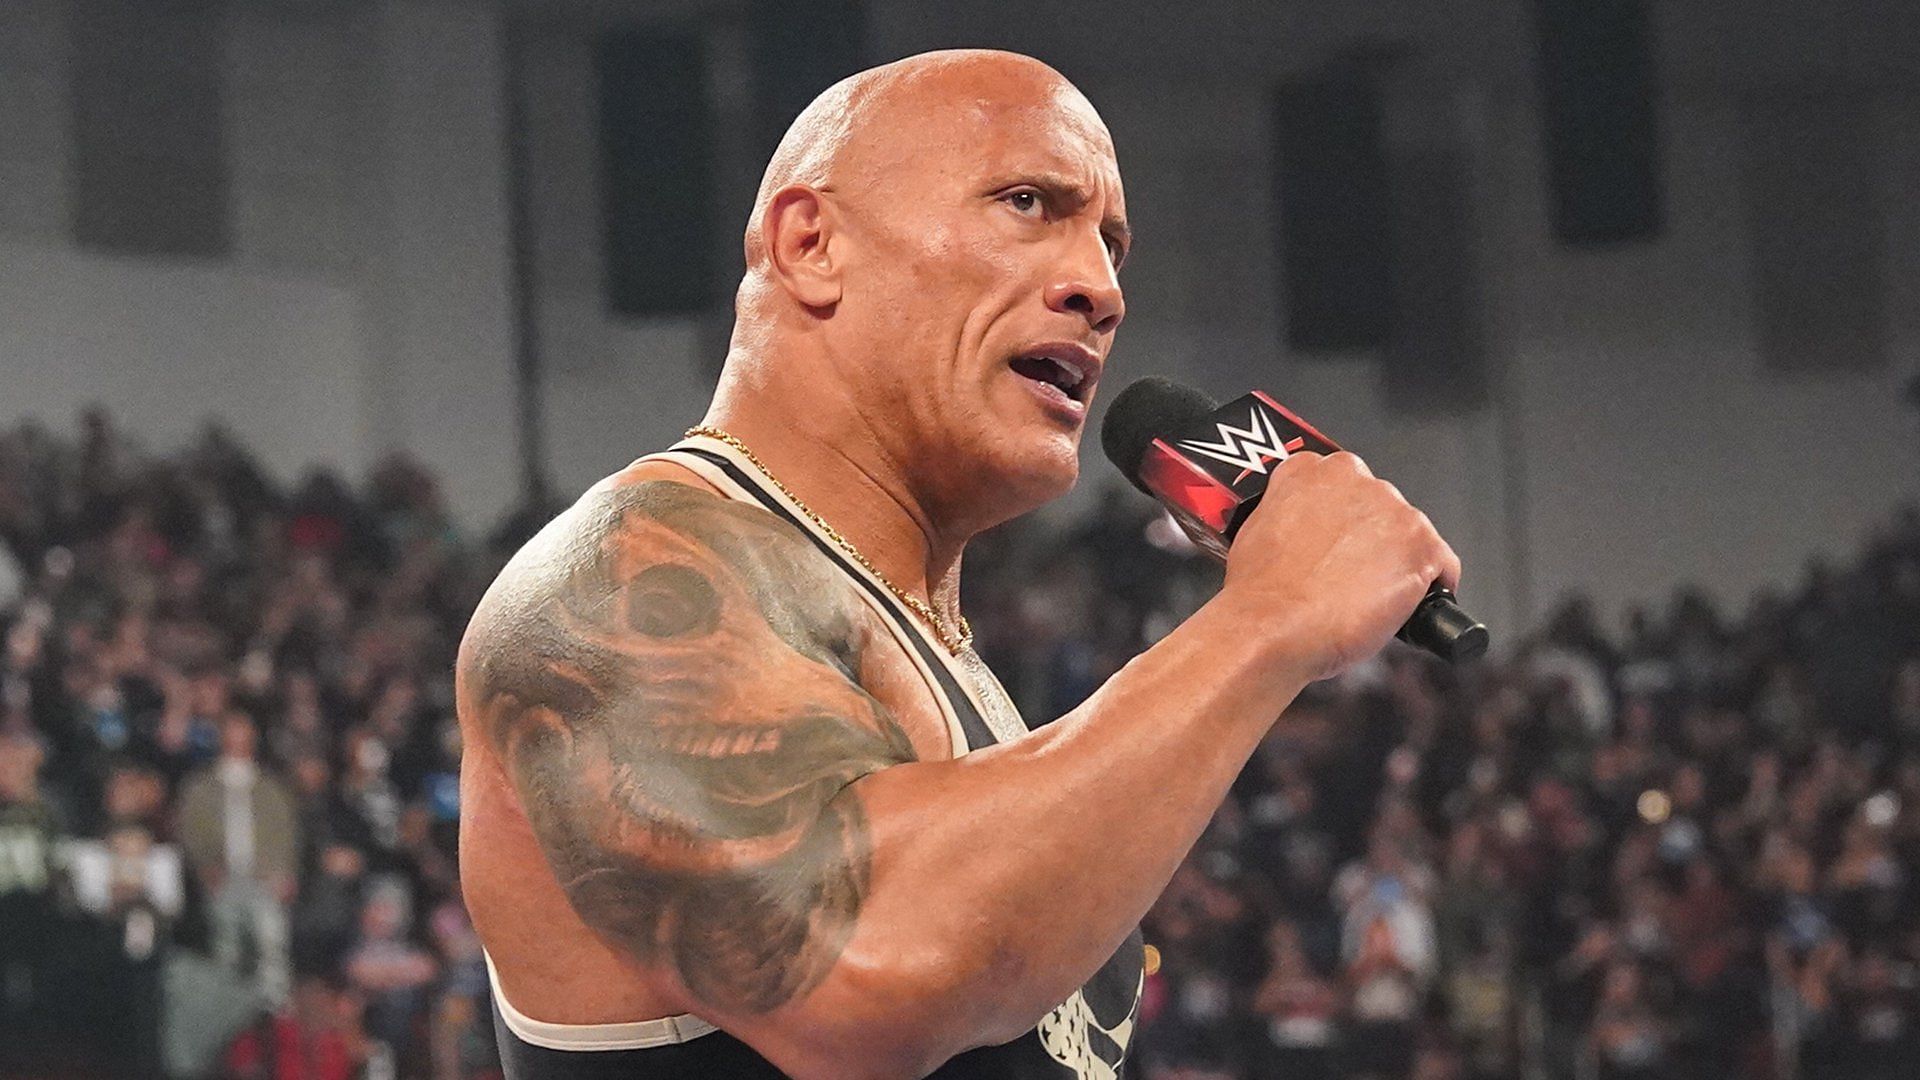 The Rock could be looking to go after Roman Reigns